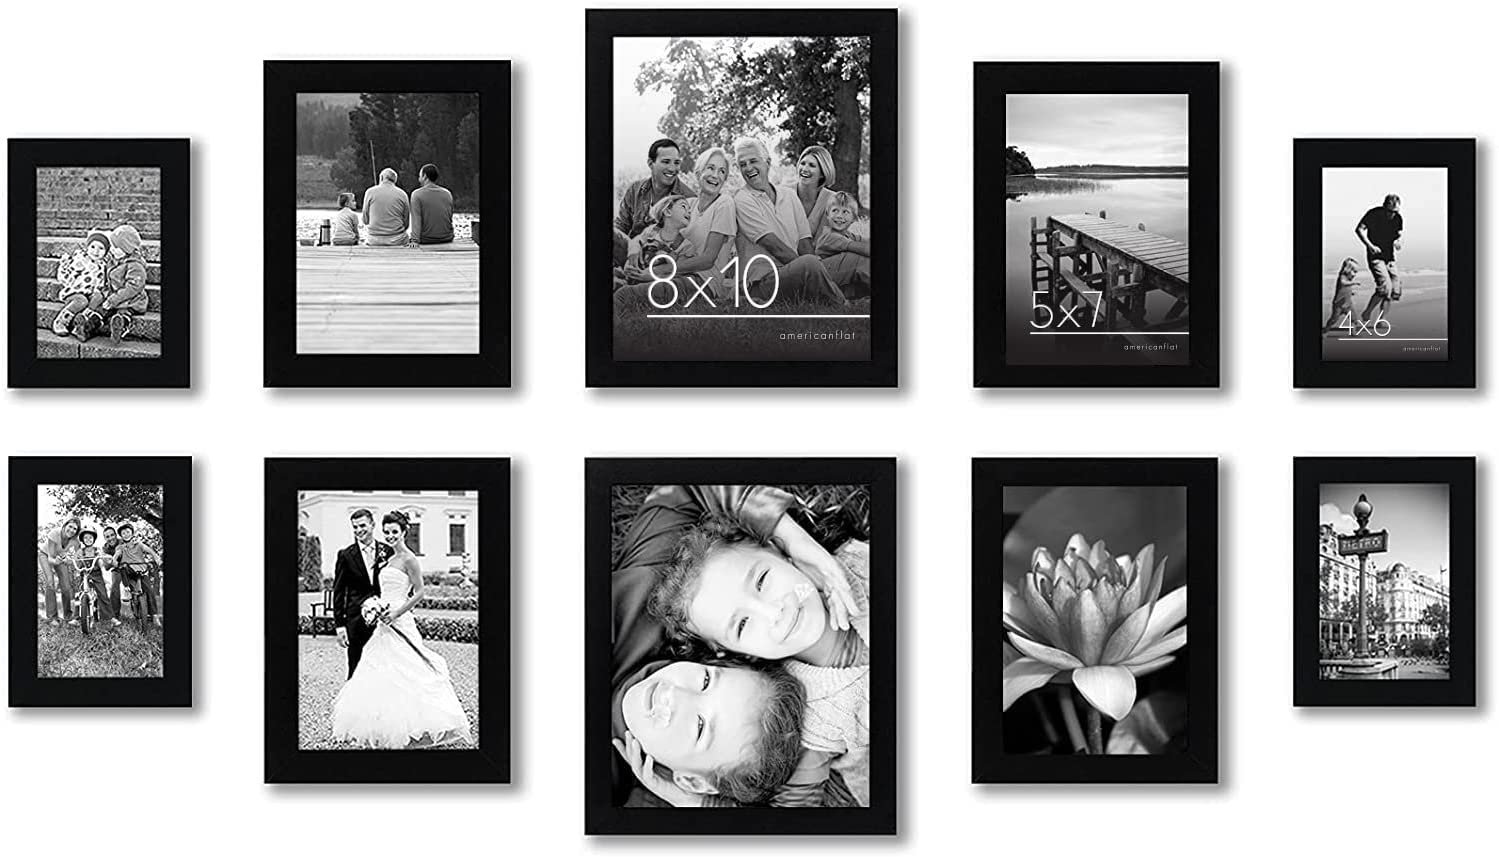 Bless international Picture Frame Set, 10 Pieces with Two 8x10